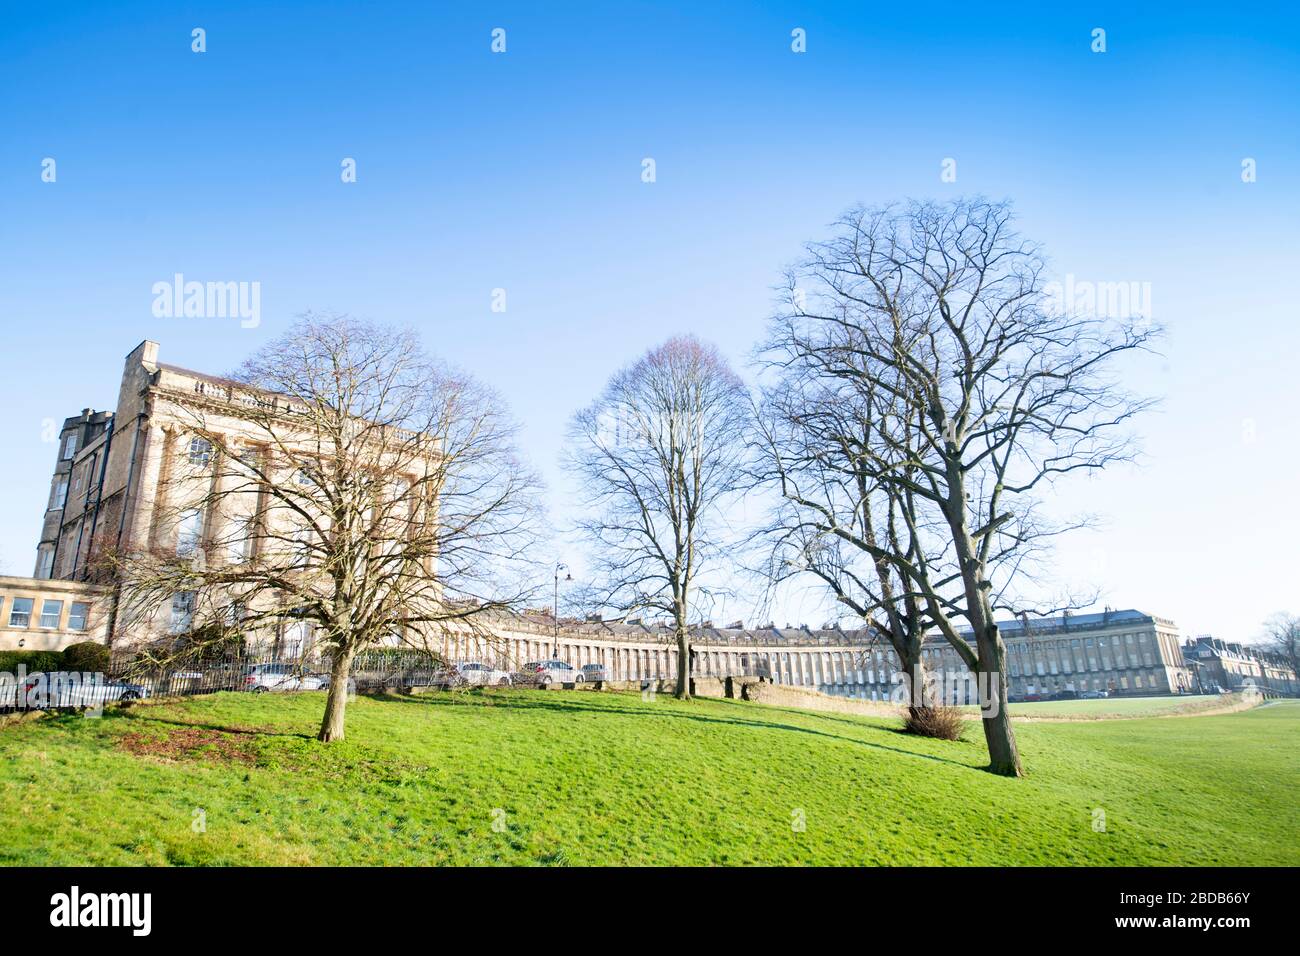 The Royal Crescent in Bath UK Stock Photo